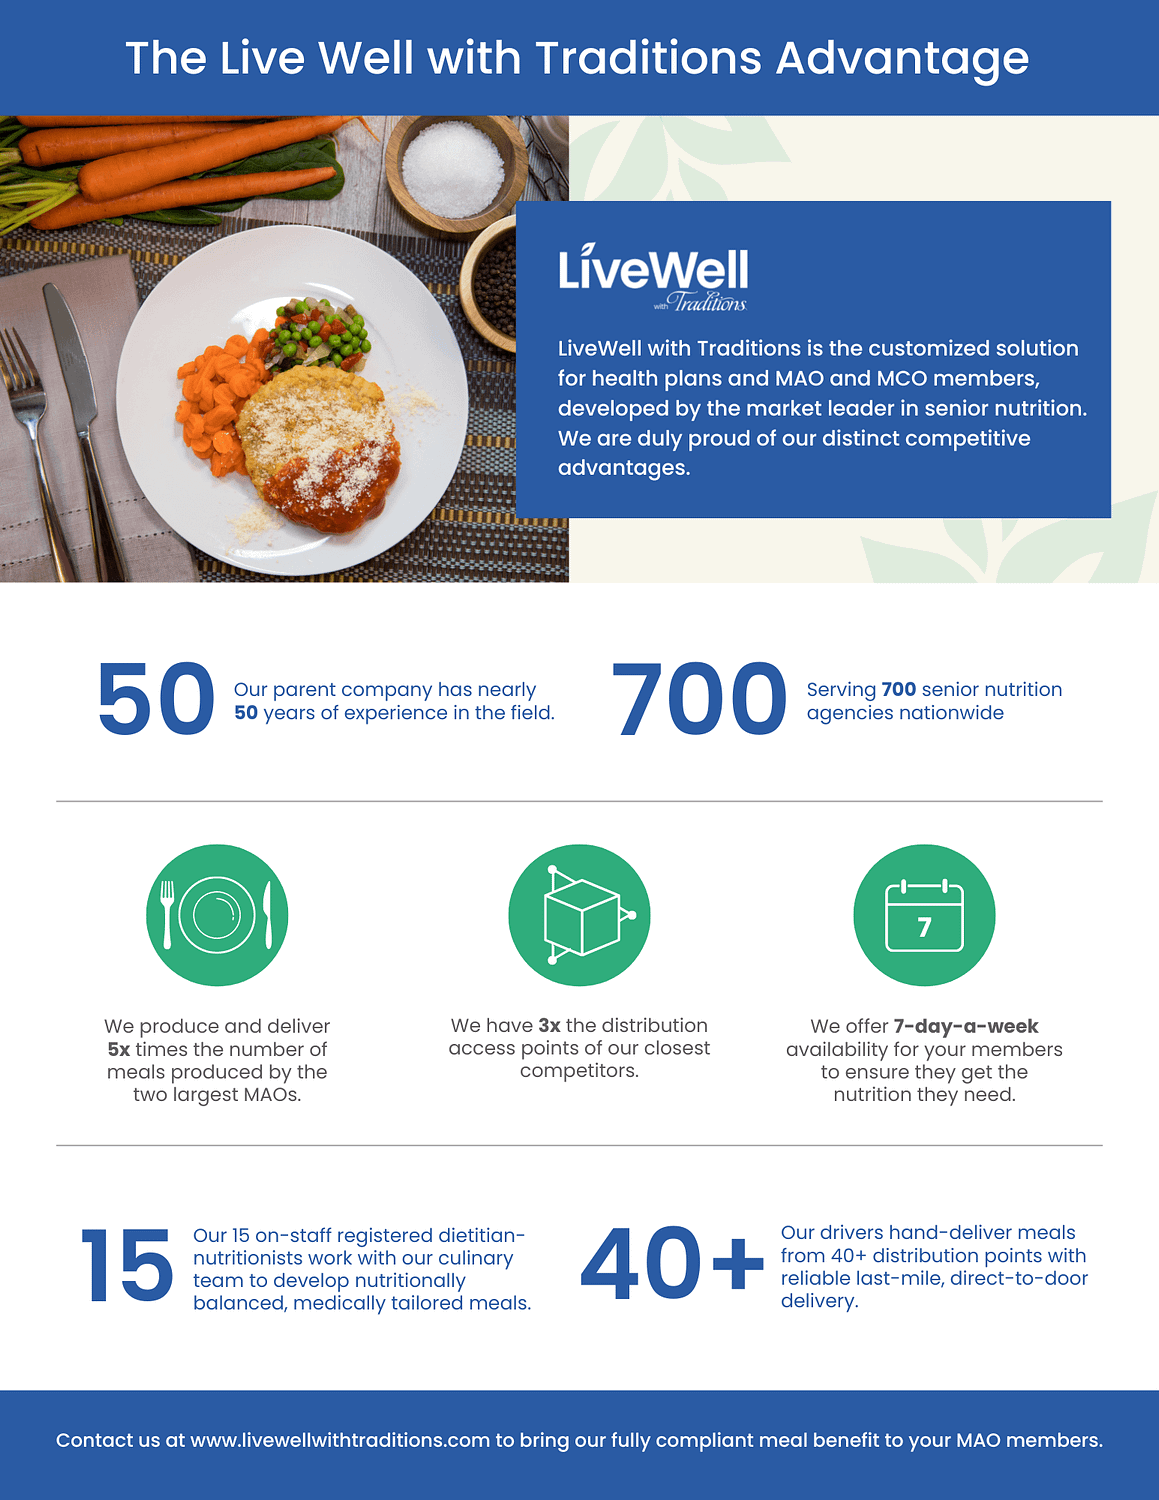 LiveWell with Traditions Economy of Scale Infographic